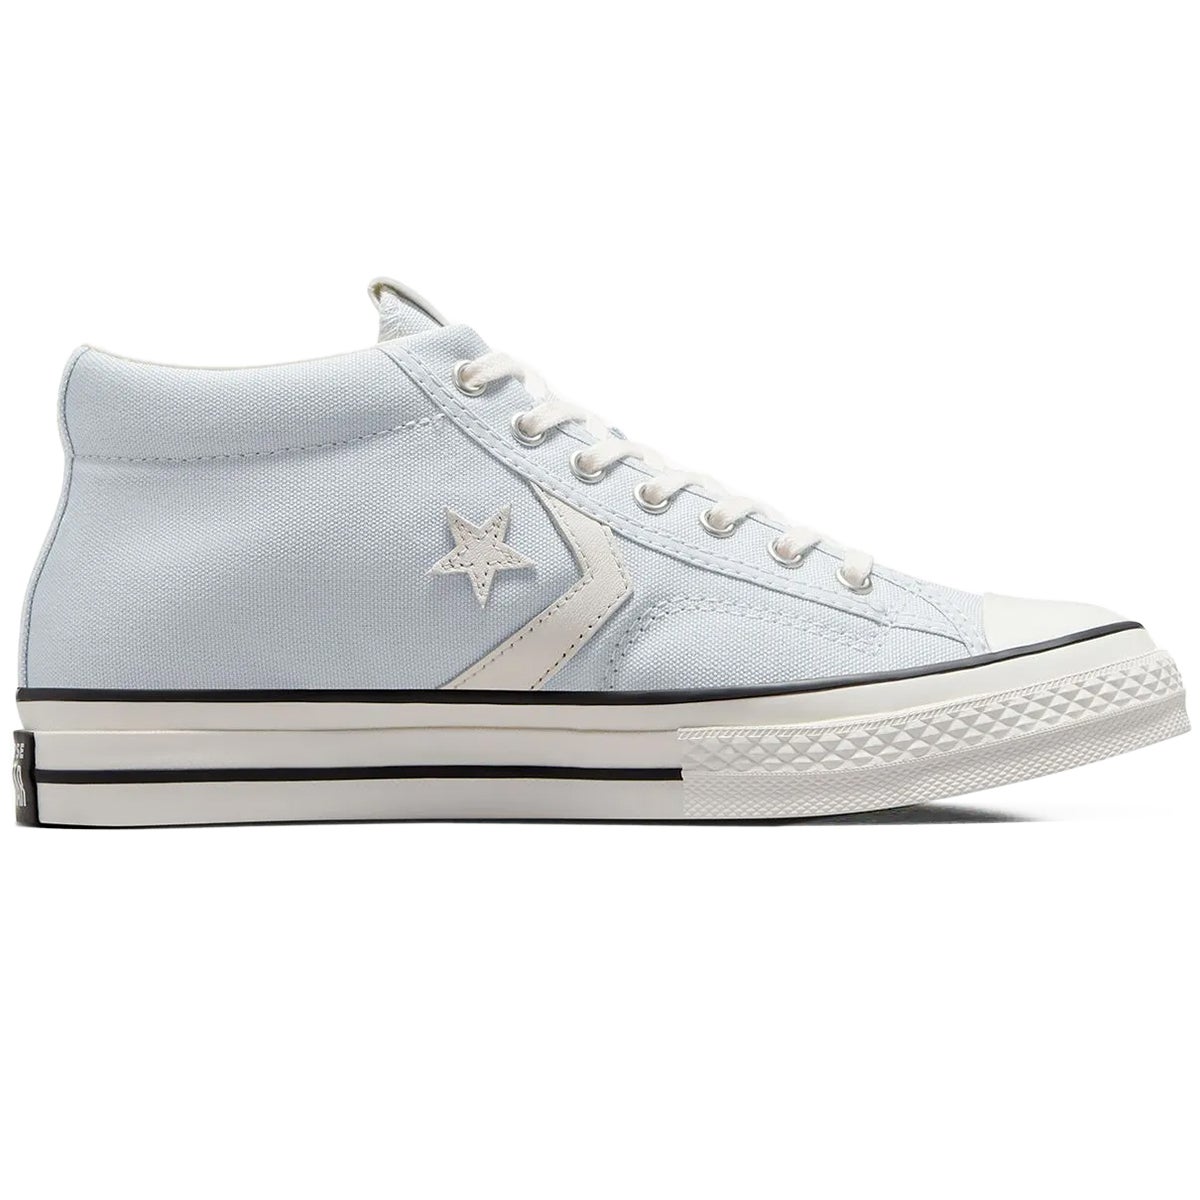 Converse Star Player 76 Shoe in Ghosted/Vintage White/Egret | Boardertown